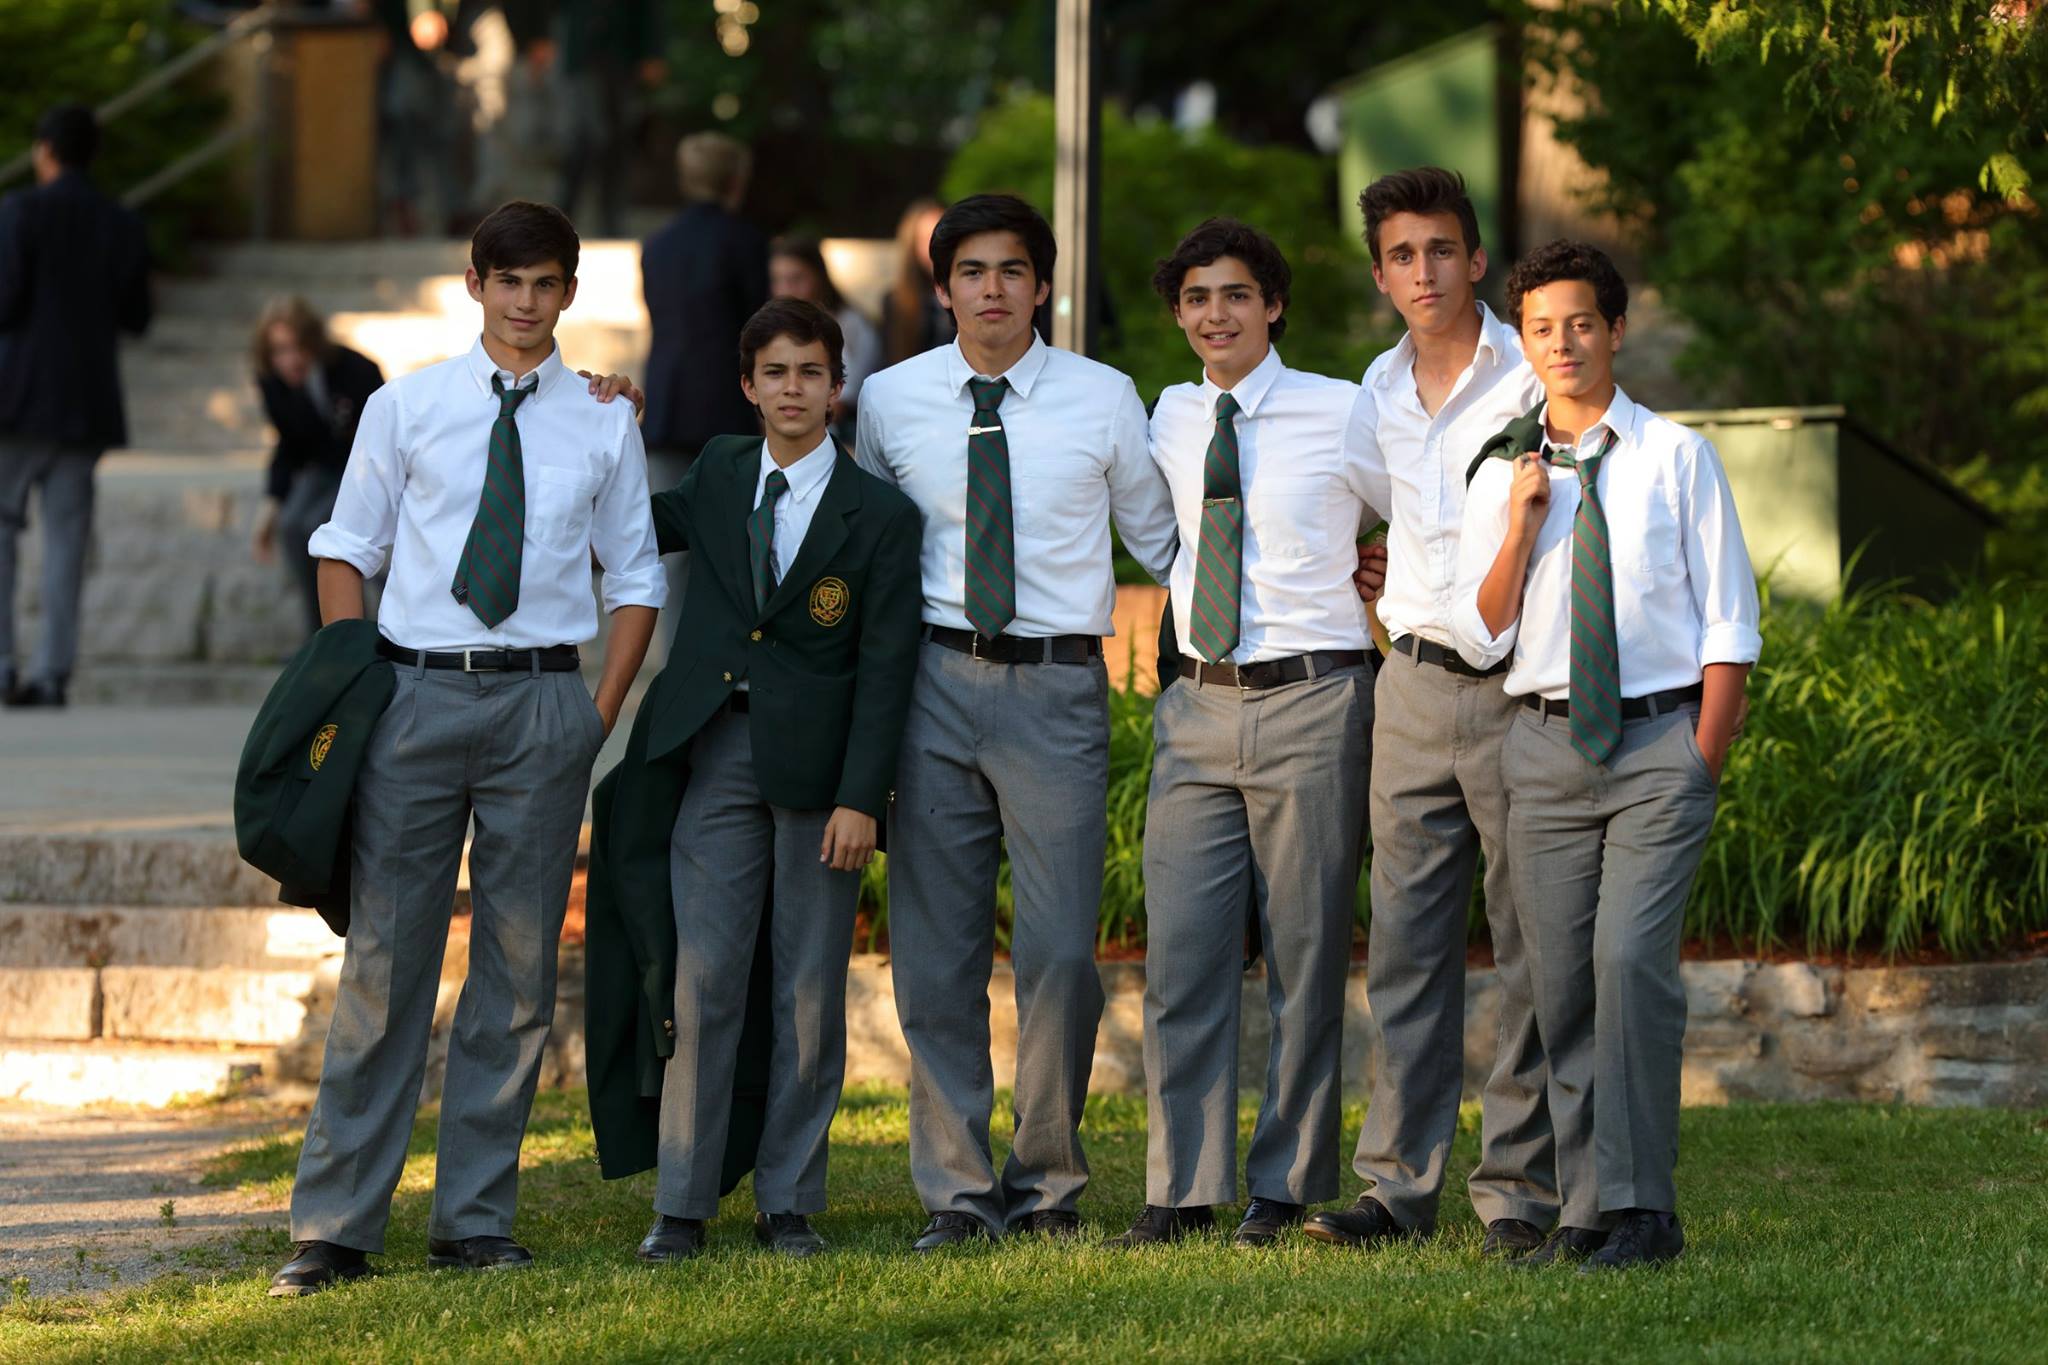 The Answers to 5 Popular Questions About Attending Boarding School